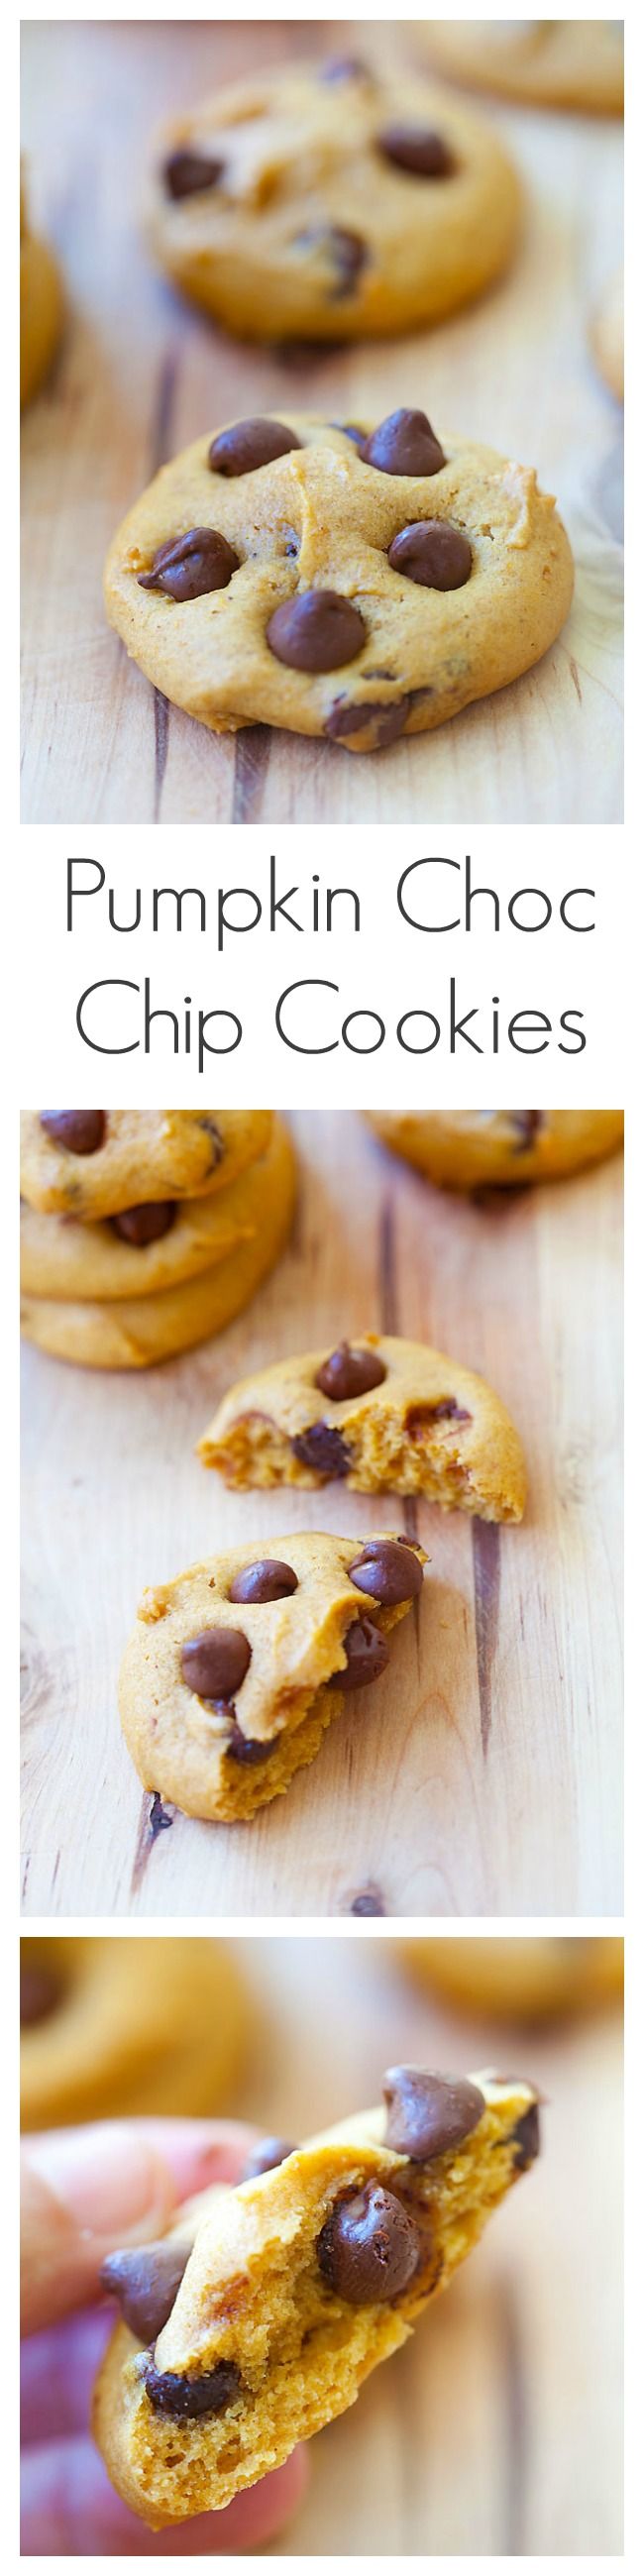 Pumpkin chocolate chip cookies that are chewy and soft, loaded with pumpkin and chocolate chips. | rasamalaysia.com